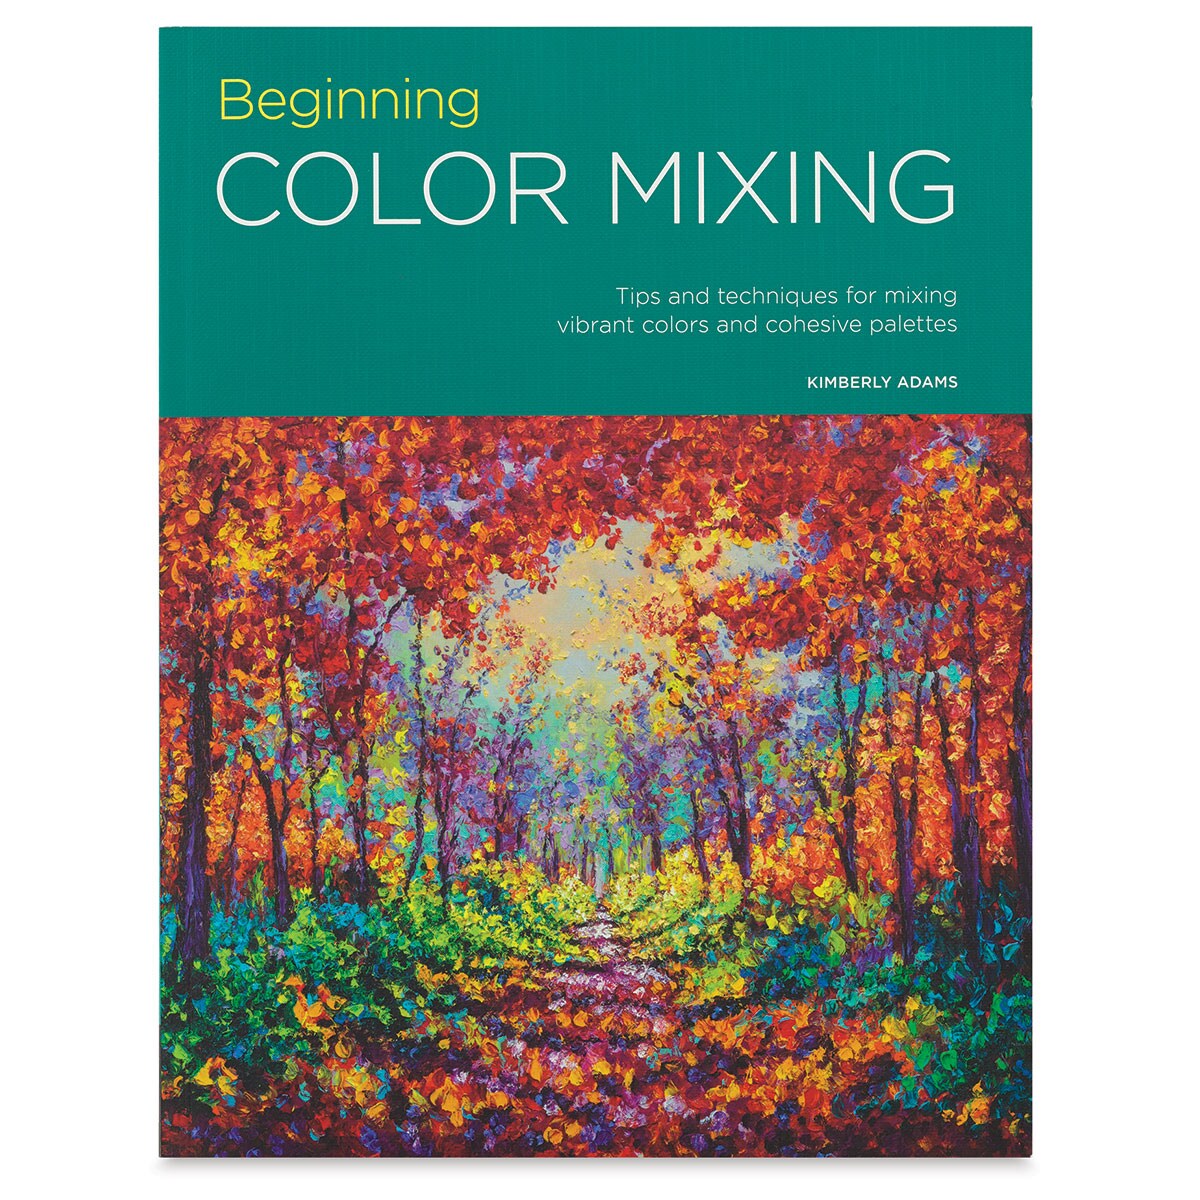 Beginning Color Mixing